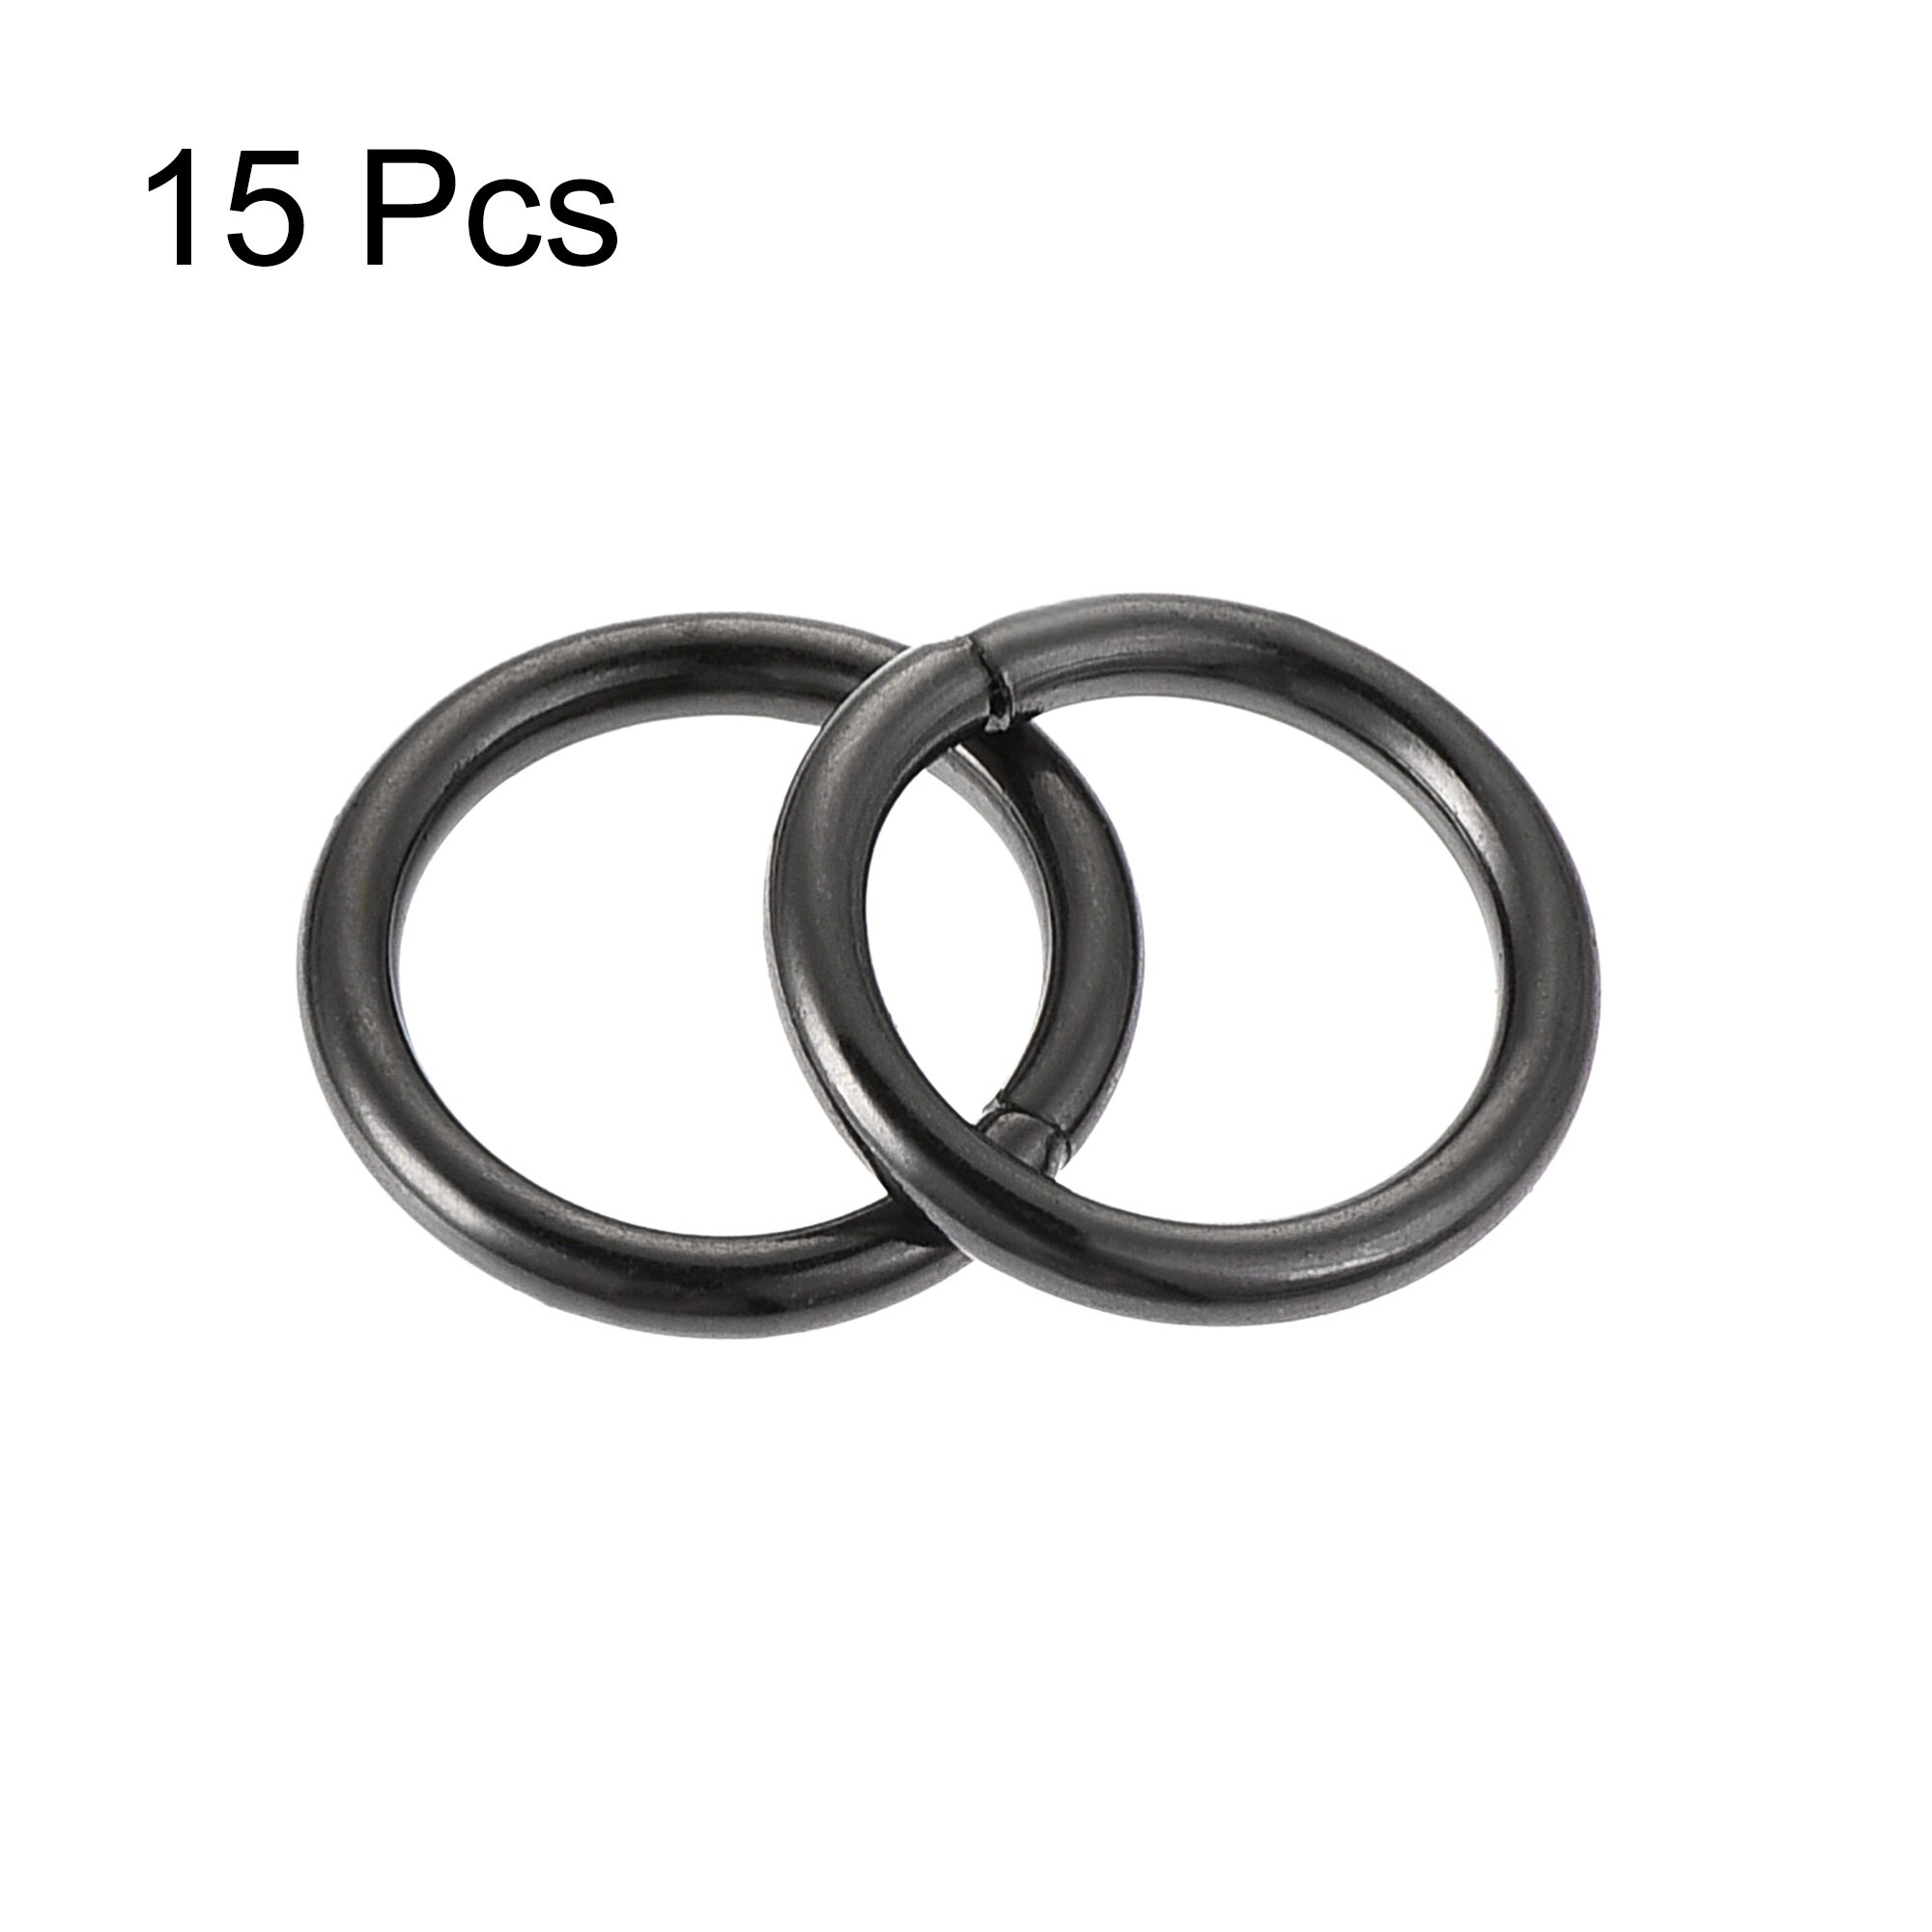 Unique Bargains Metal O Rings, 10mm(0.39) ID 1.6mm Thick Non-Welded O-Ring, Dark Gray - Dark Grey - 15pcs